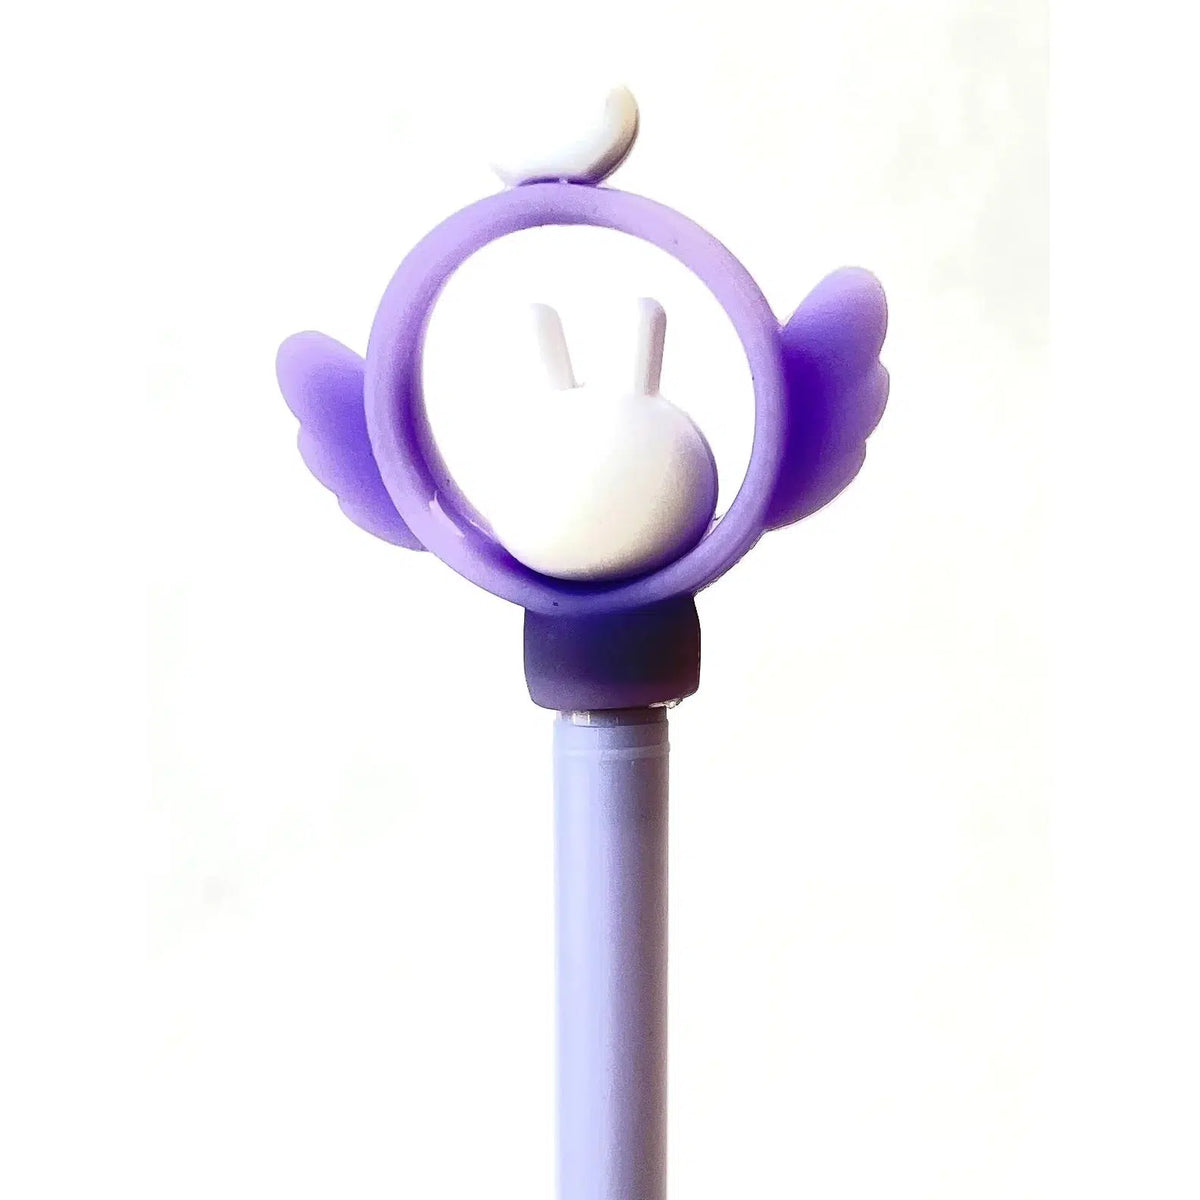 Front view of the lavender pen with white heart Magic Wand Gel Pen.